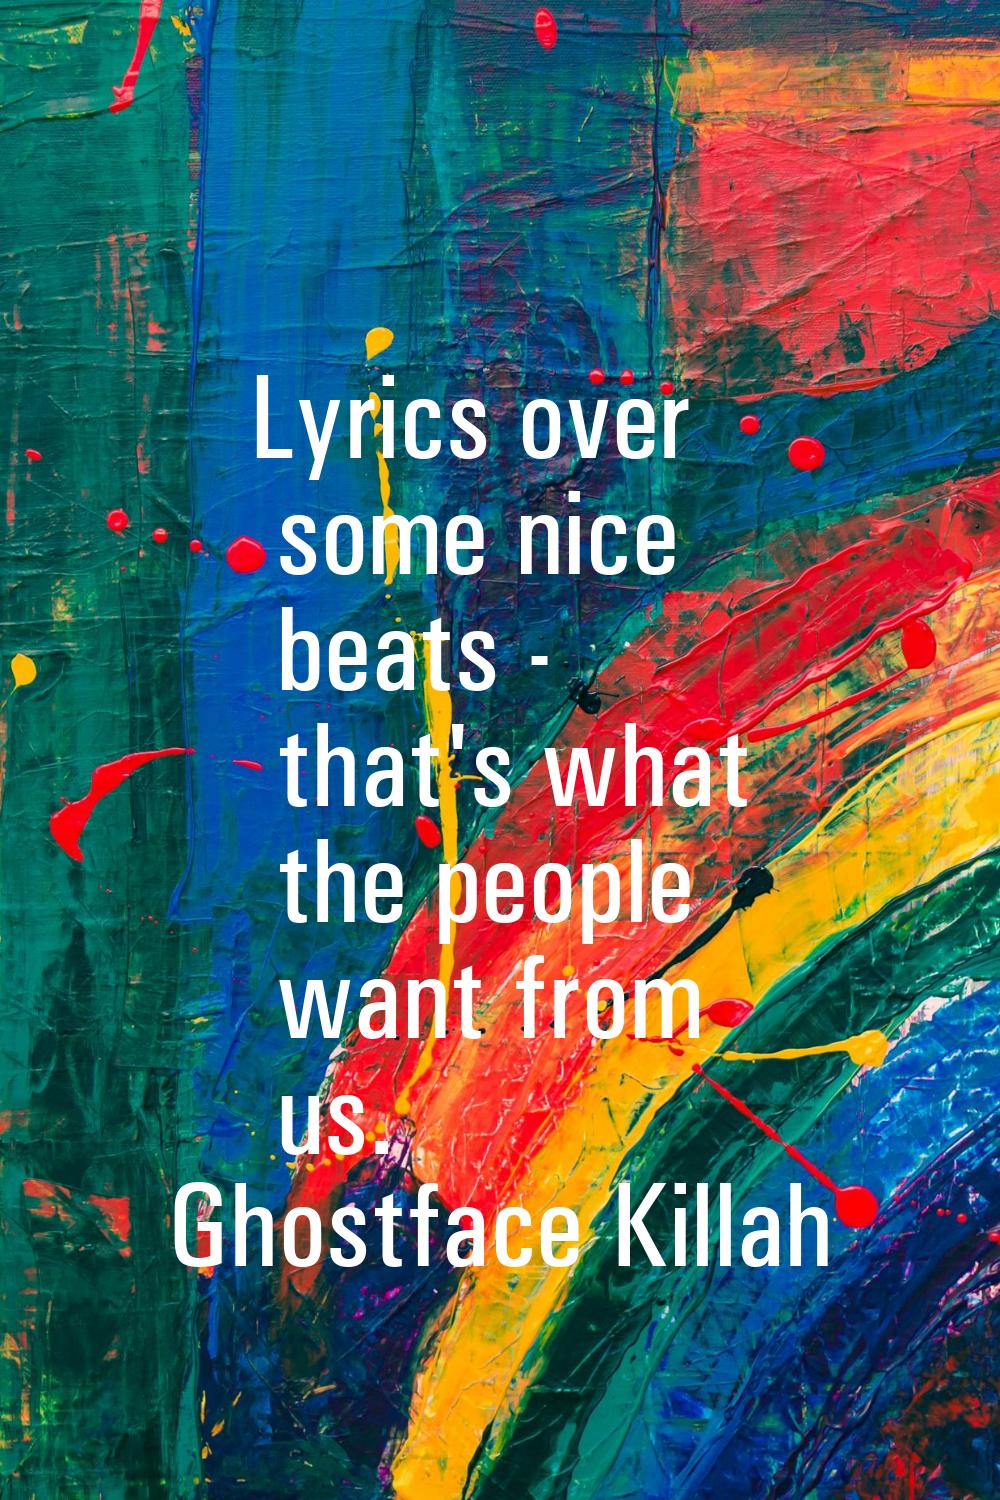 Lyrics over some nice beats - that's what the people want from us.